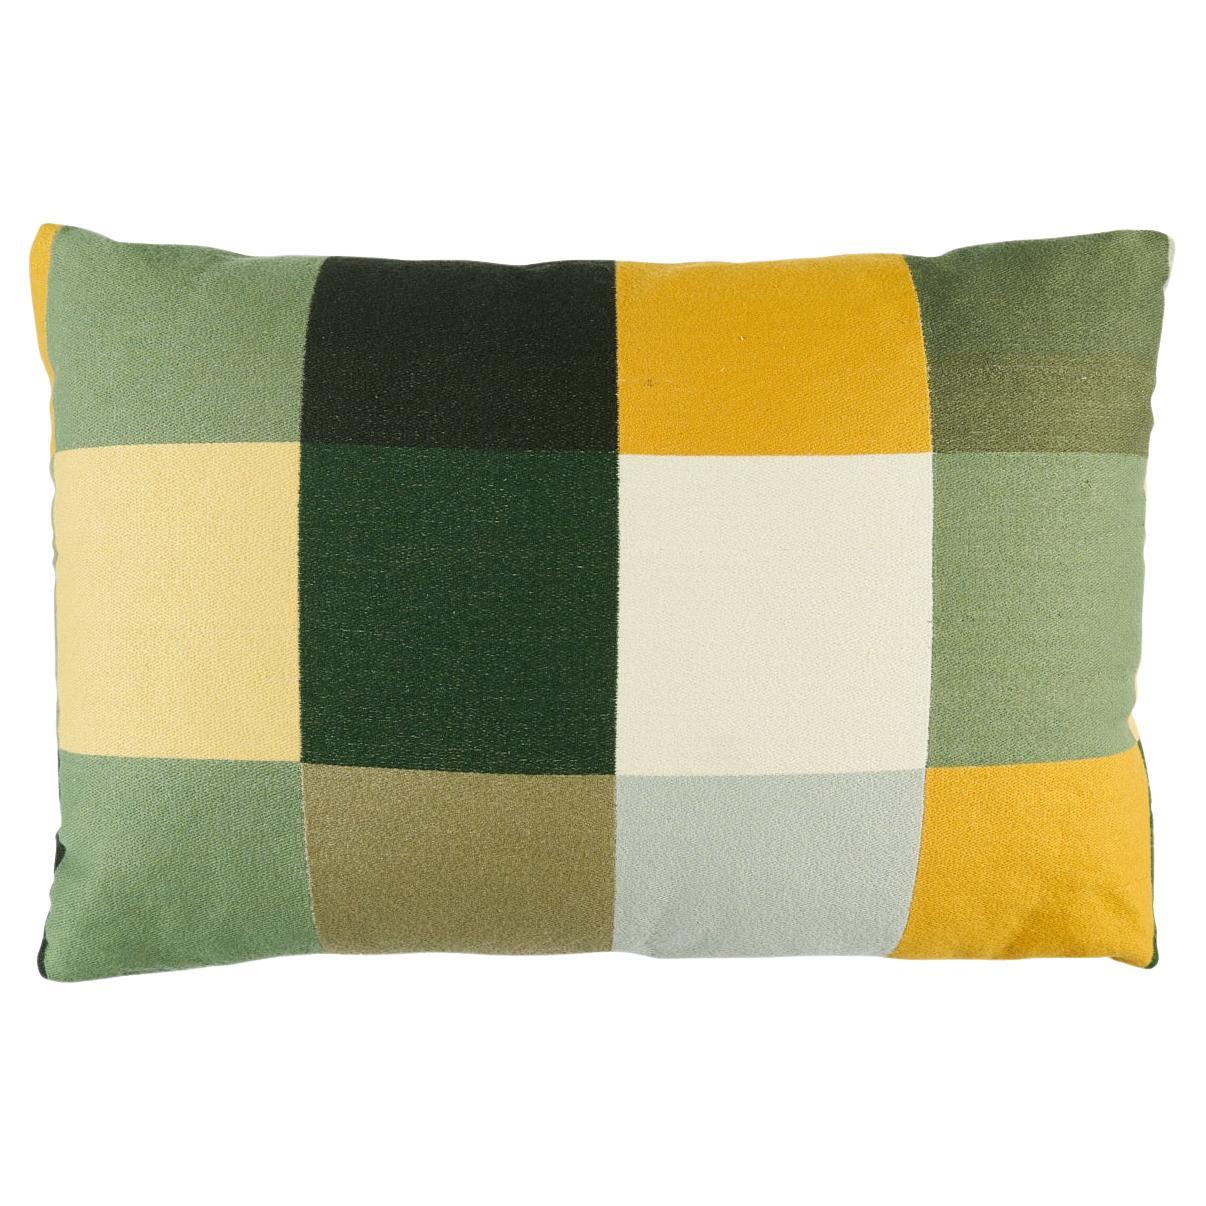 Schumacher Embroidered Tile Pillow 20x14" in Green For Sale